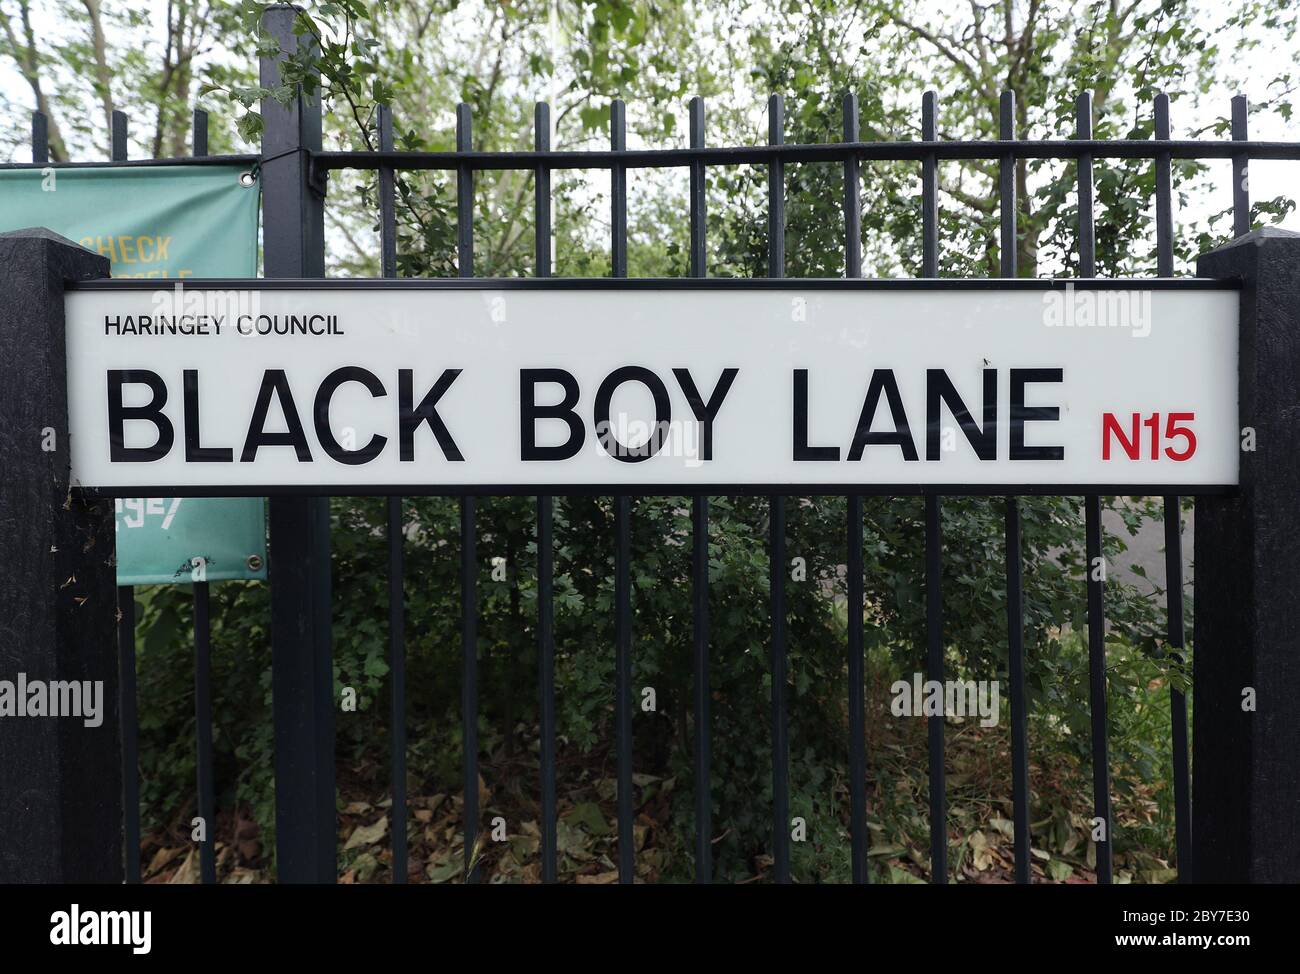 A street sign for Black Boy Lane in north London, as London mayor Sadiq Khan said that London's landmarks Ð including street names, the names of public buildings and plaques Ð will be reviewed to ensure they reflect the capital's diversity after protesters tore down a statue of slave trader Edward Colston in Bristol. Stock Photo